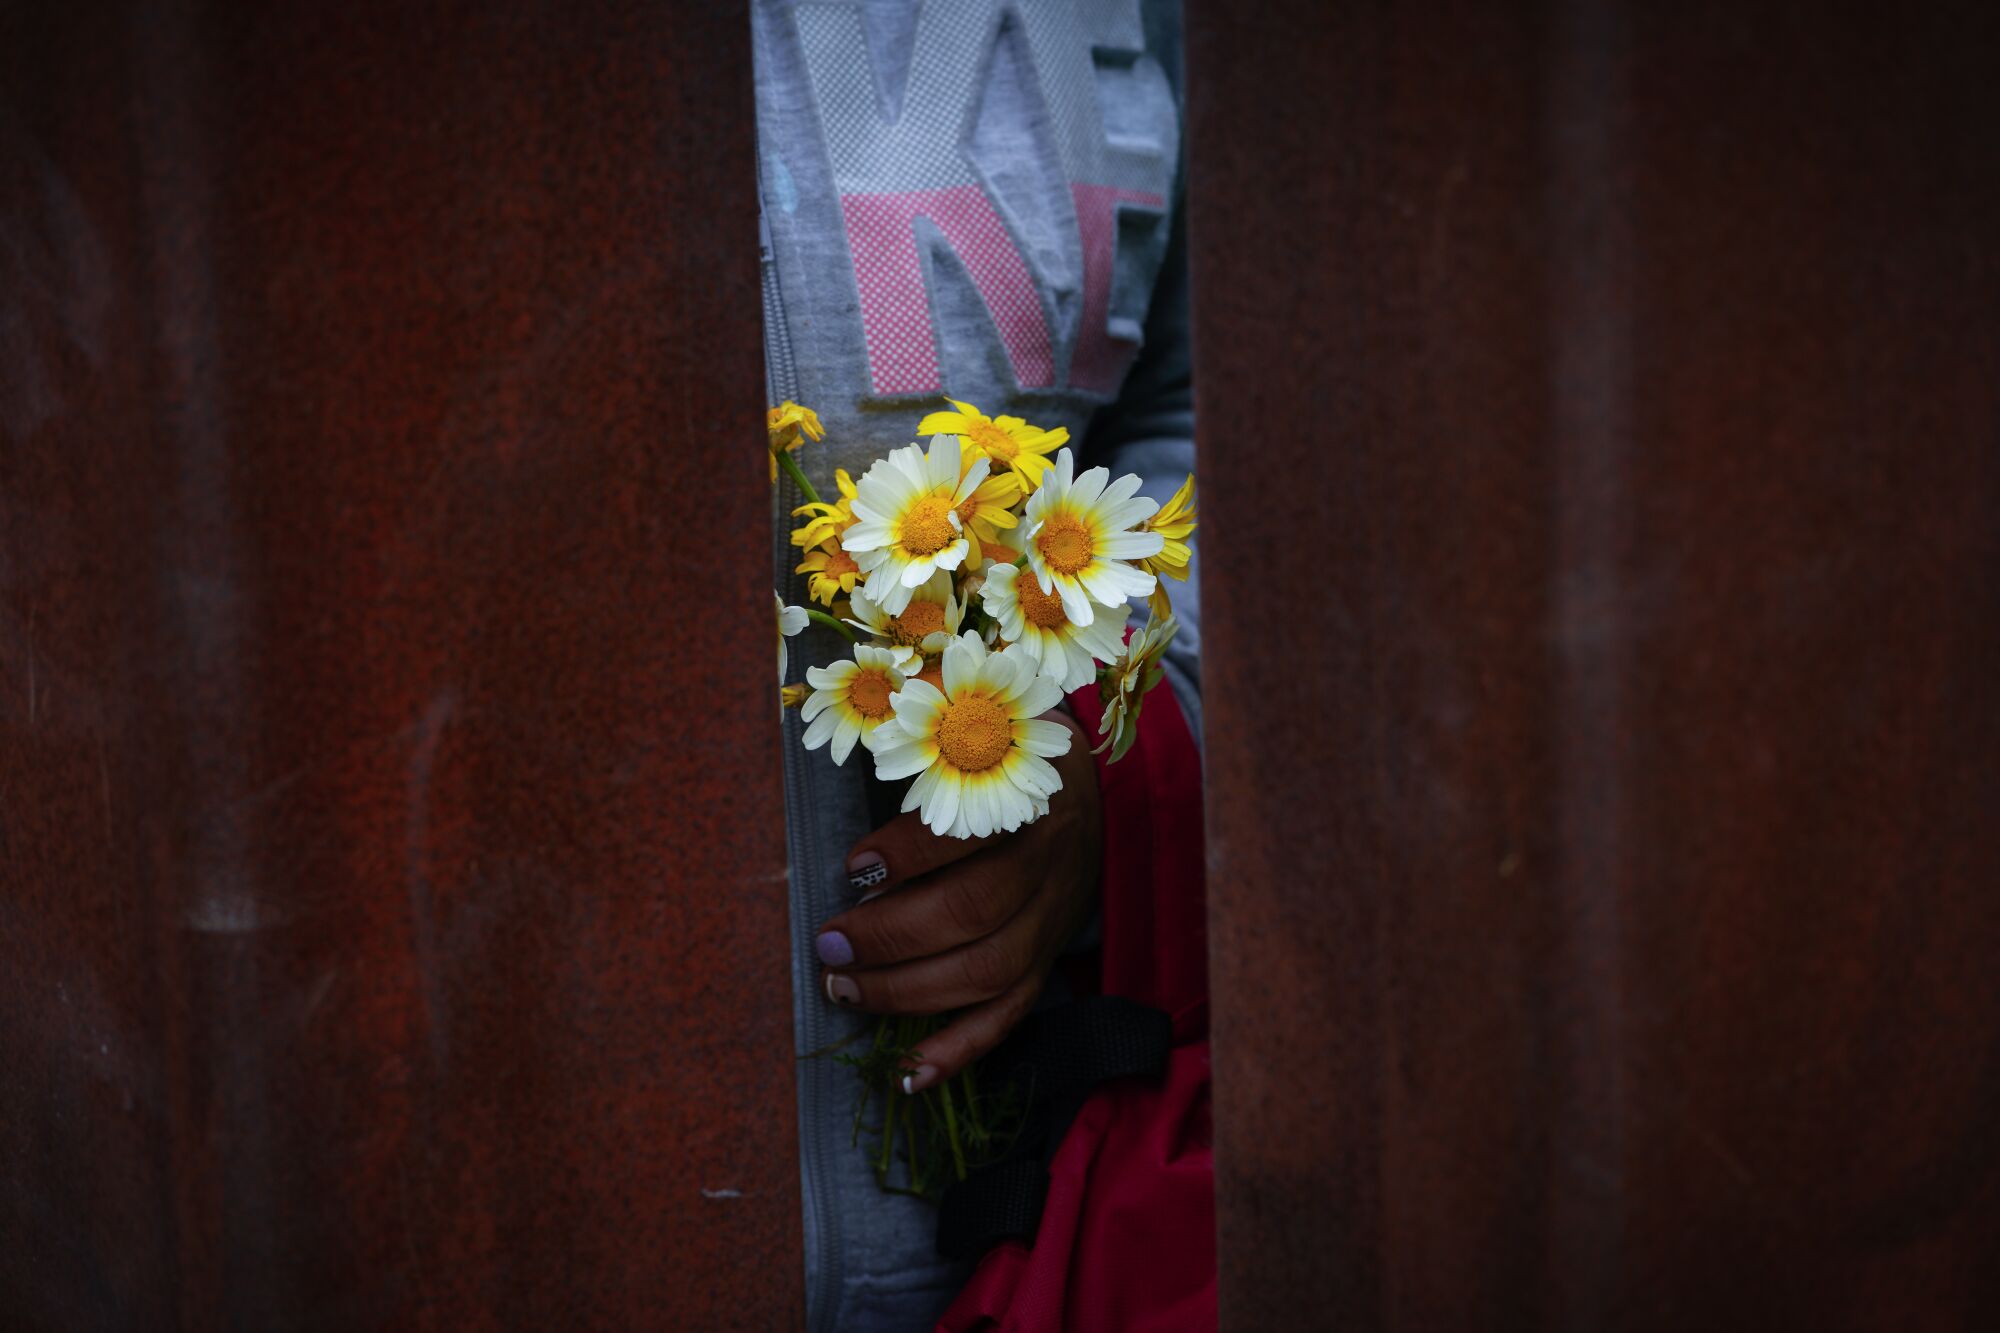 A woman at the encampment along the U.S. Mexico border held a small bouquet of wild flowers.